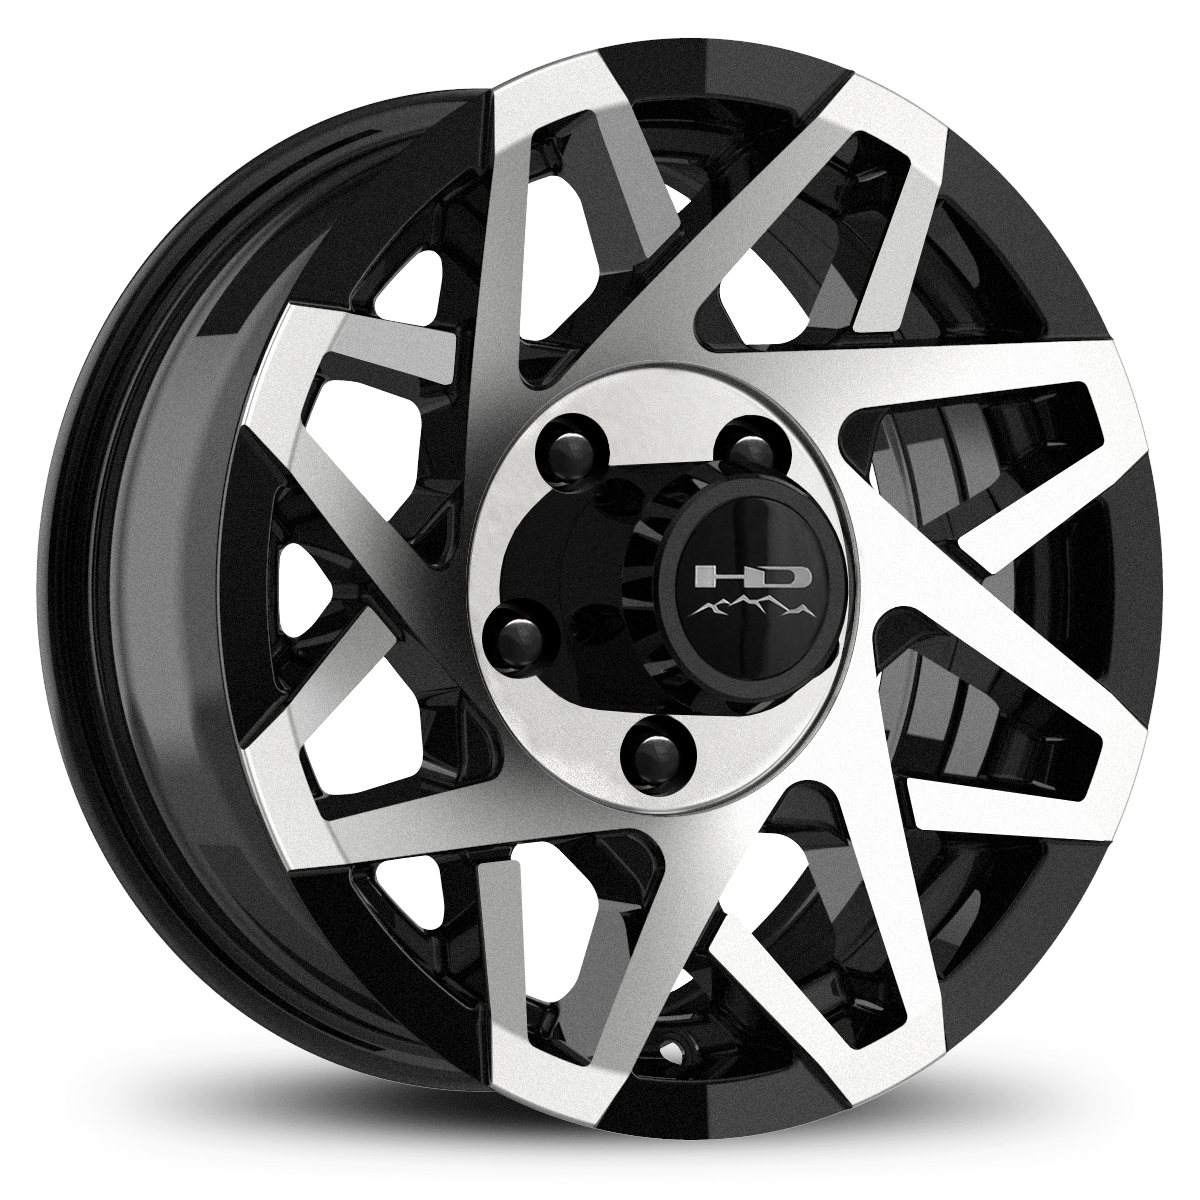 HD Off-Road Canyon Custom Trailer Wheel Rims in 14x5.5 Gloss Black Machined Face with Center Cap & Logo fits 5x4.50 / 5x114.3 Axle Boat, Car, RV, Travel, Concession, Horse, Utility, Lawn & Garden, & Landscaping.